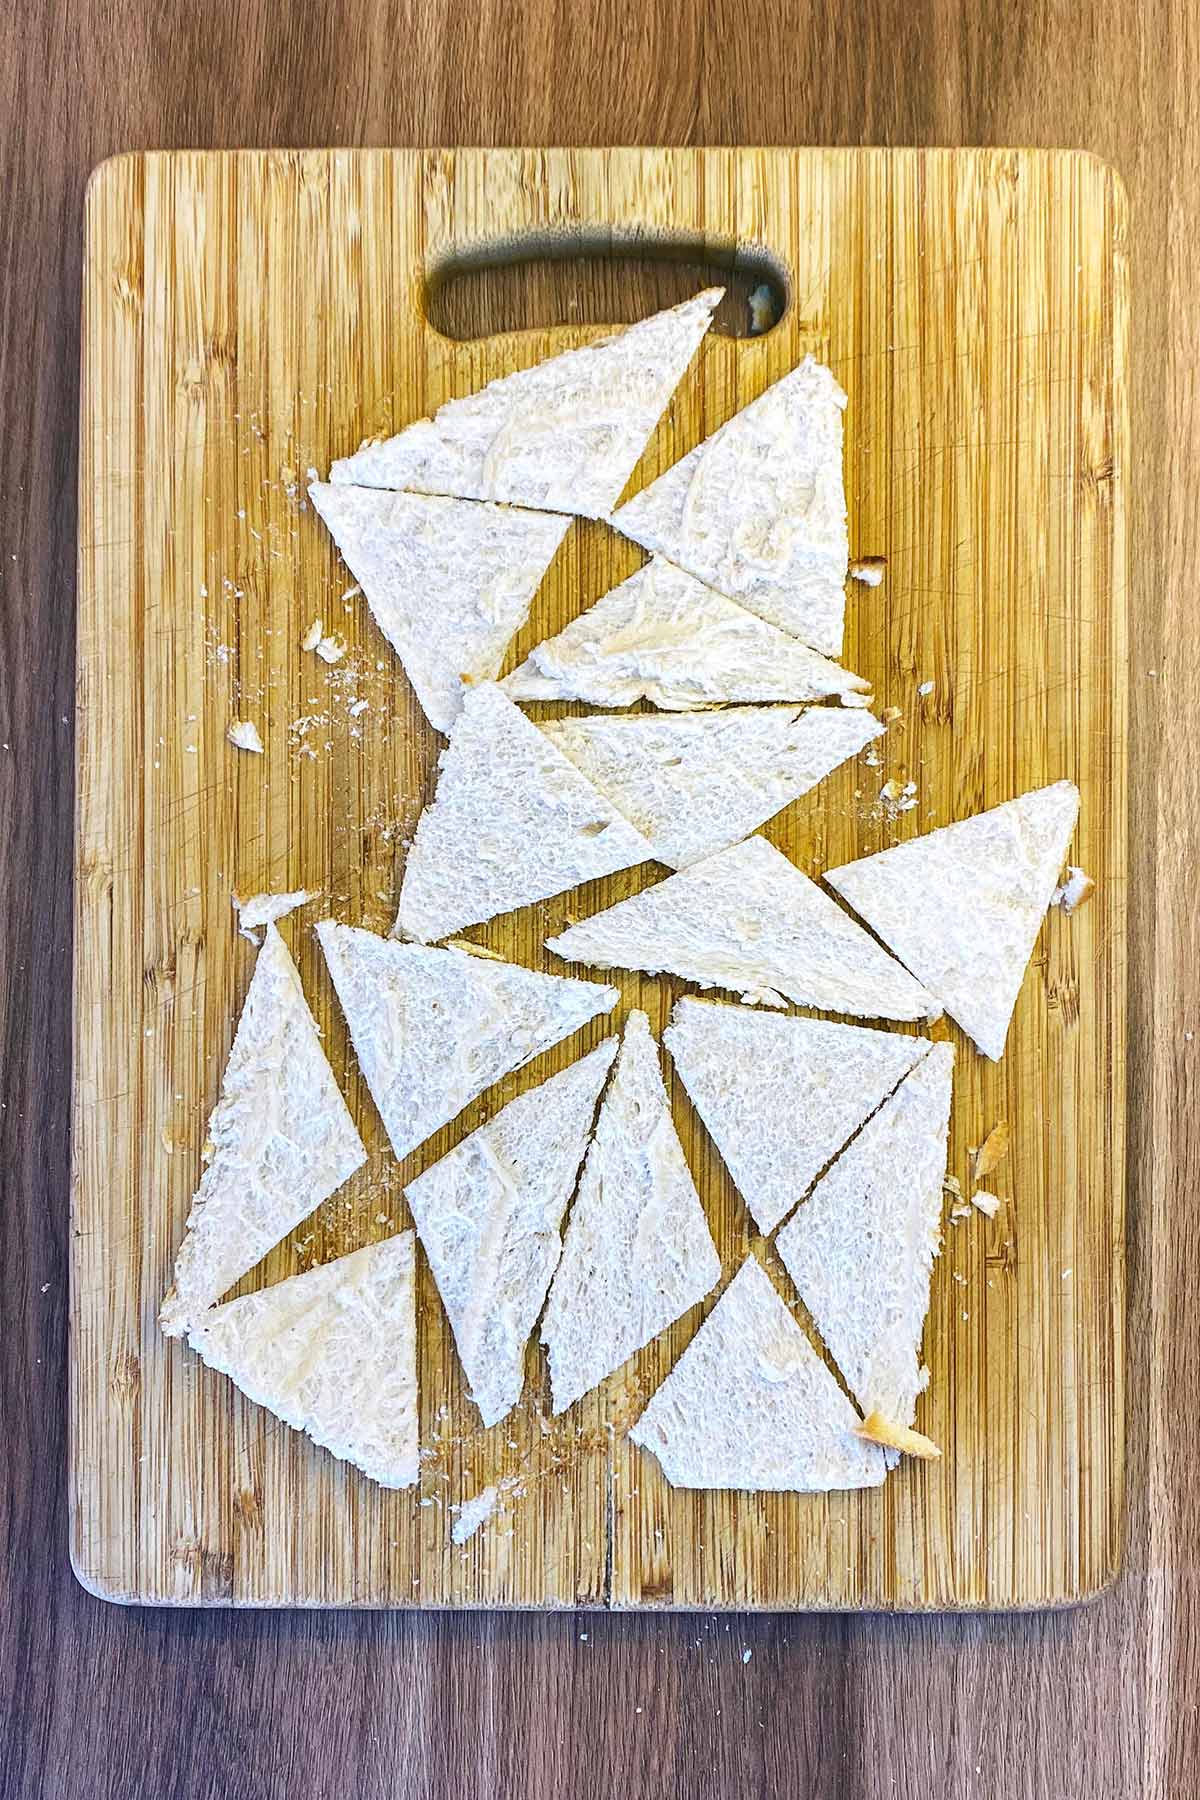 The slices cut into triangles.